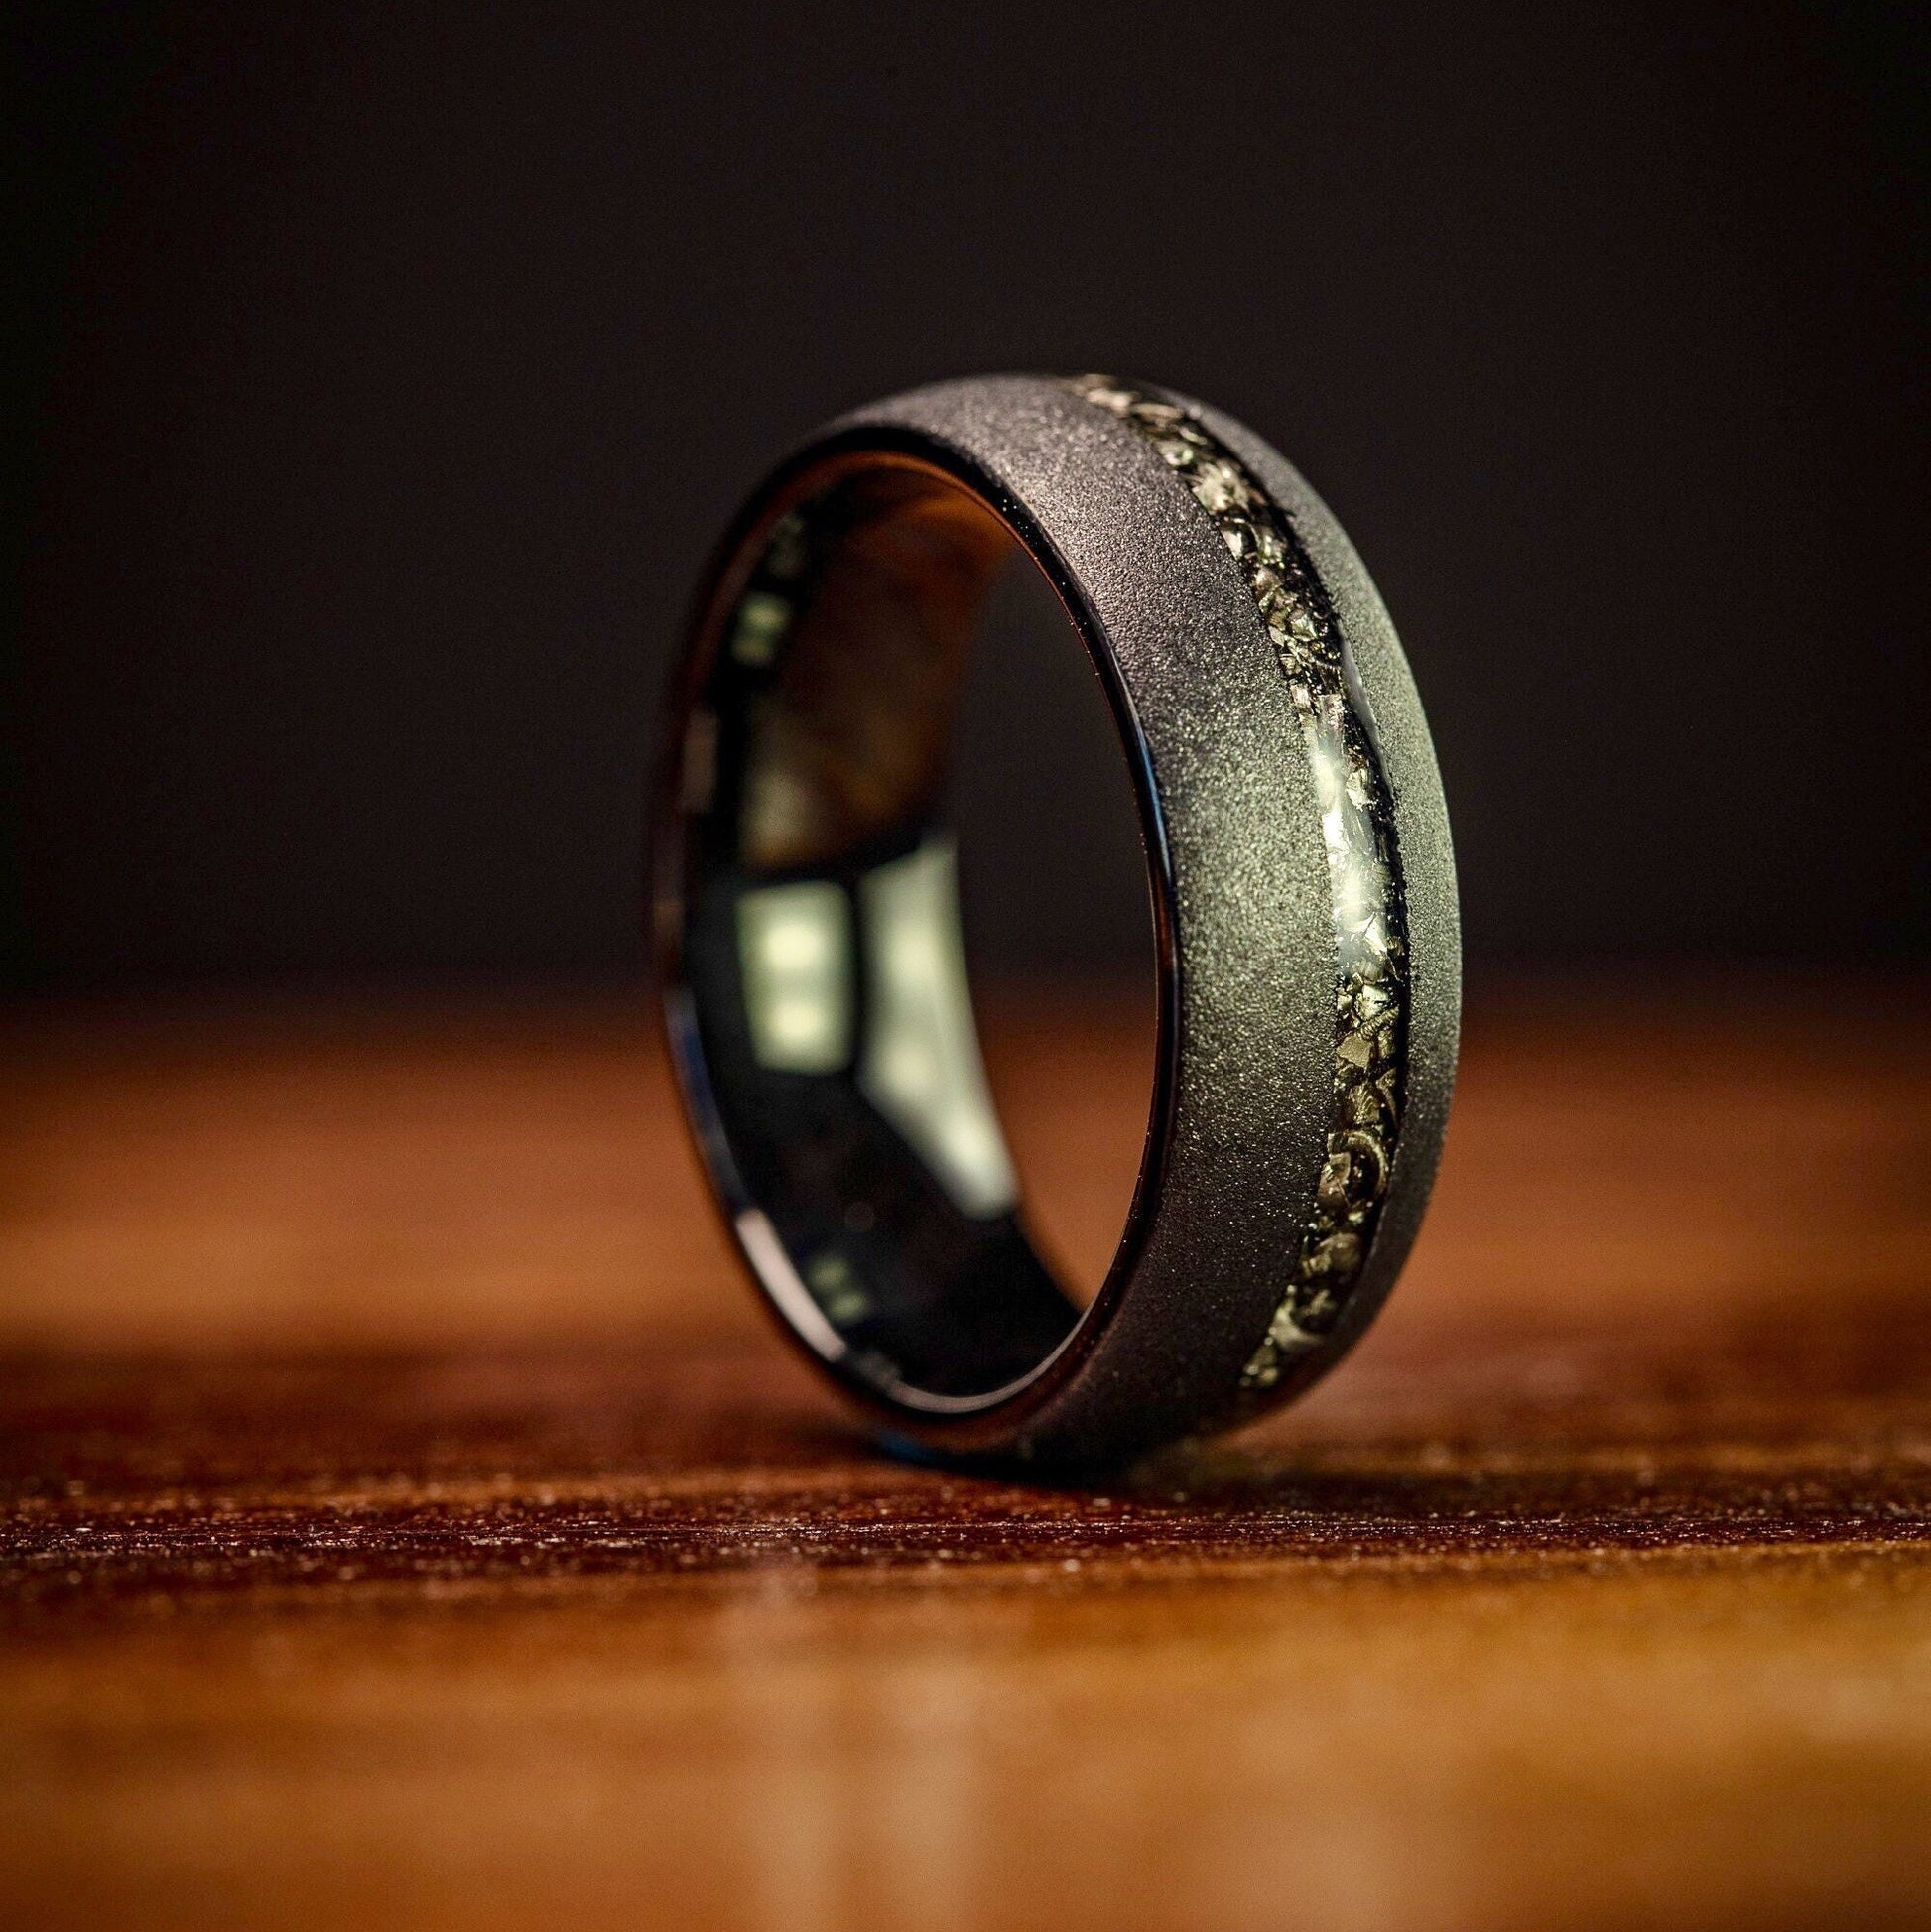 Matching couples black meteorite wedding rings, perfect for exchanging vows.